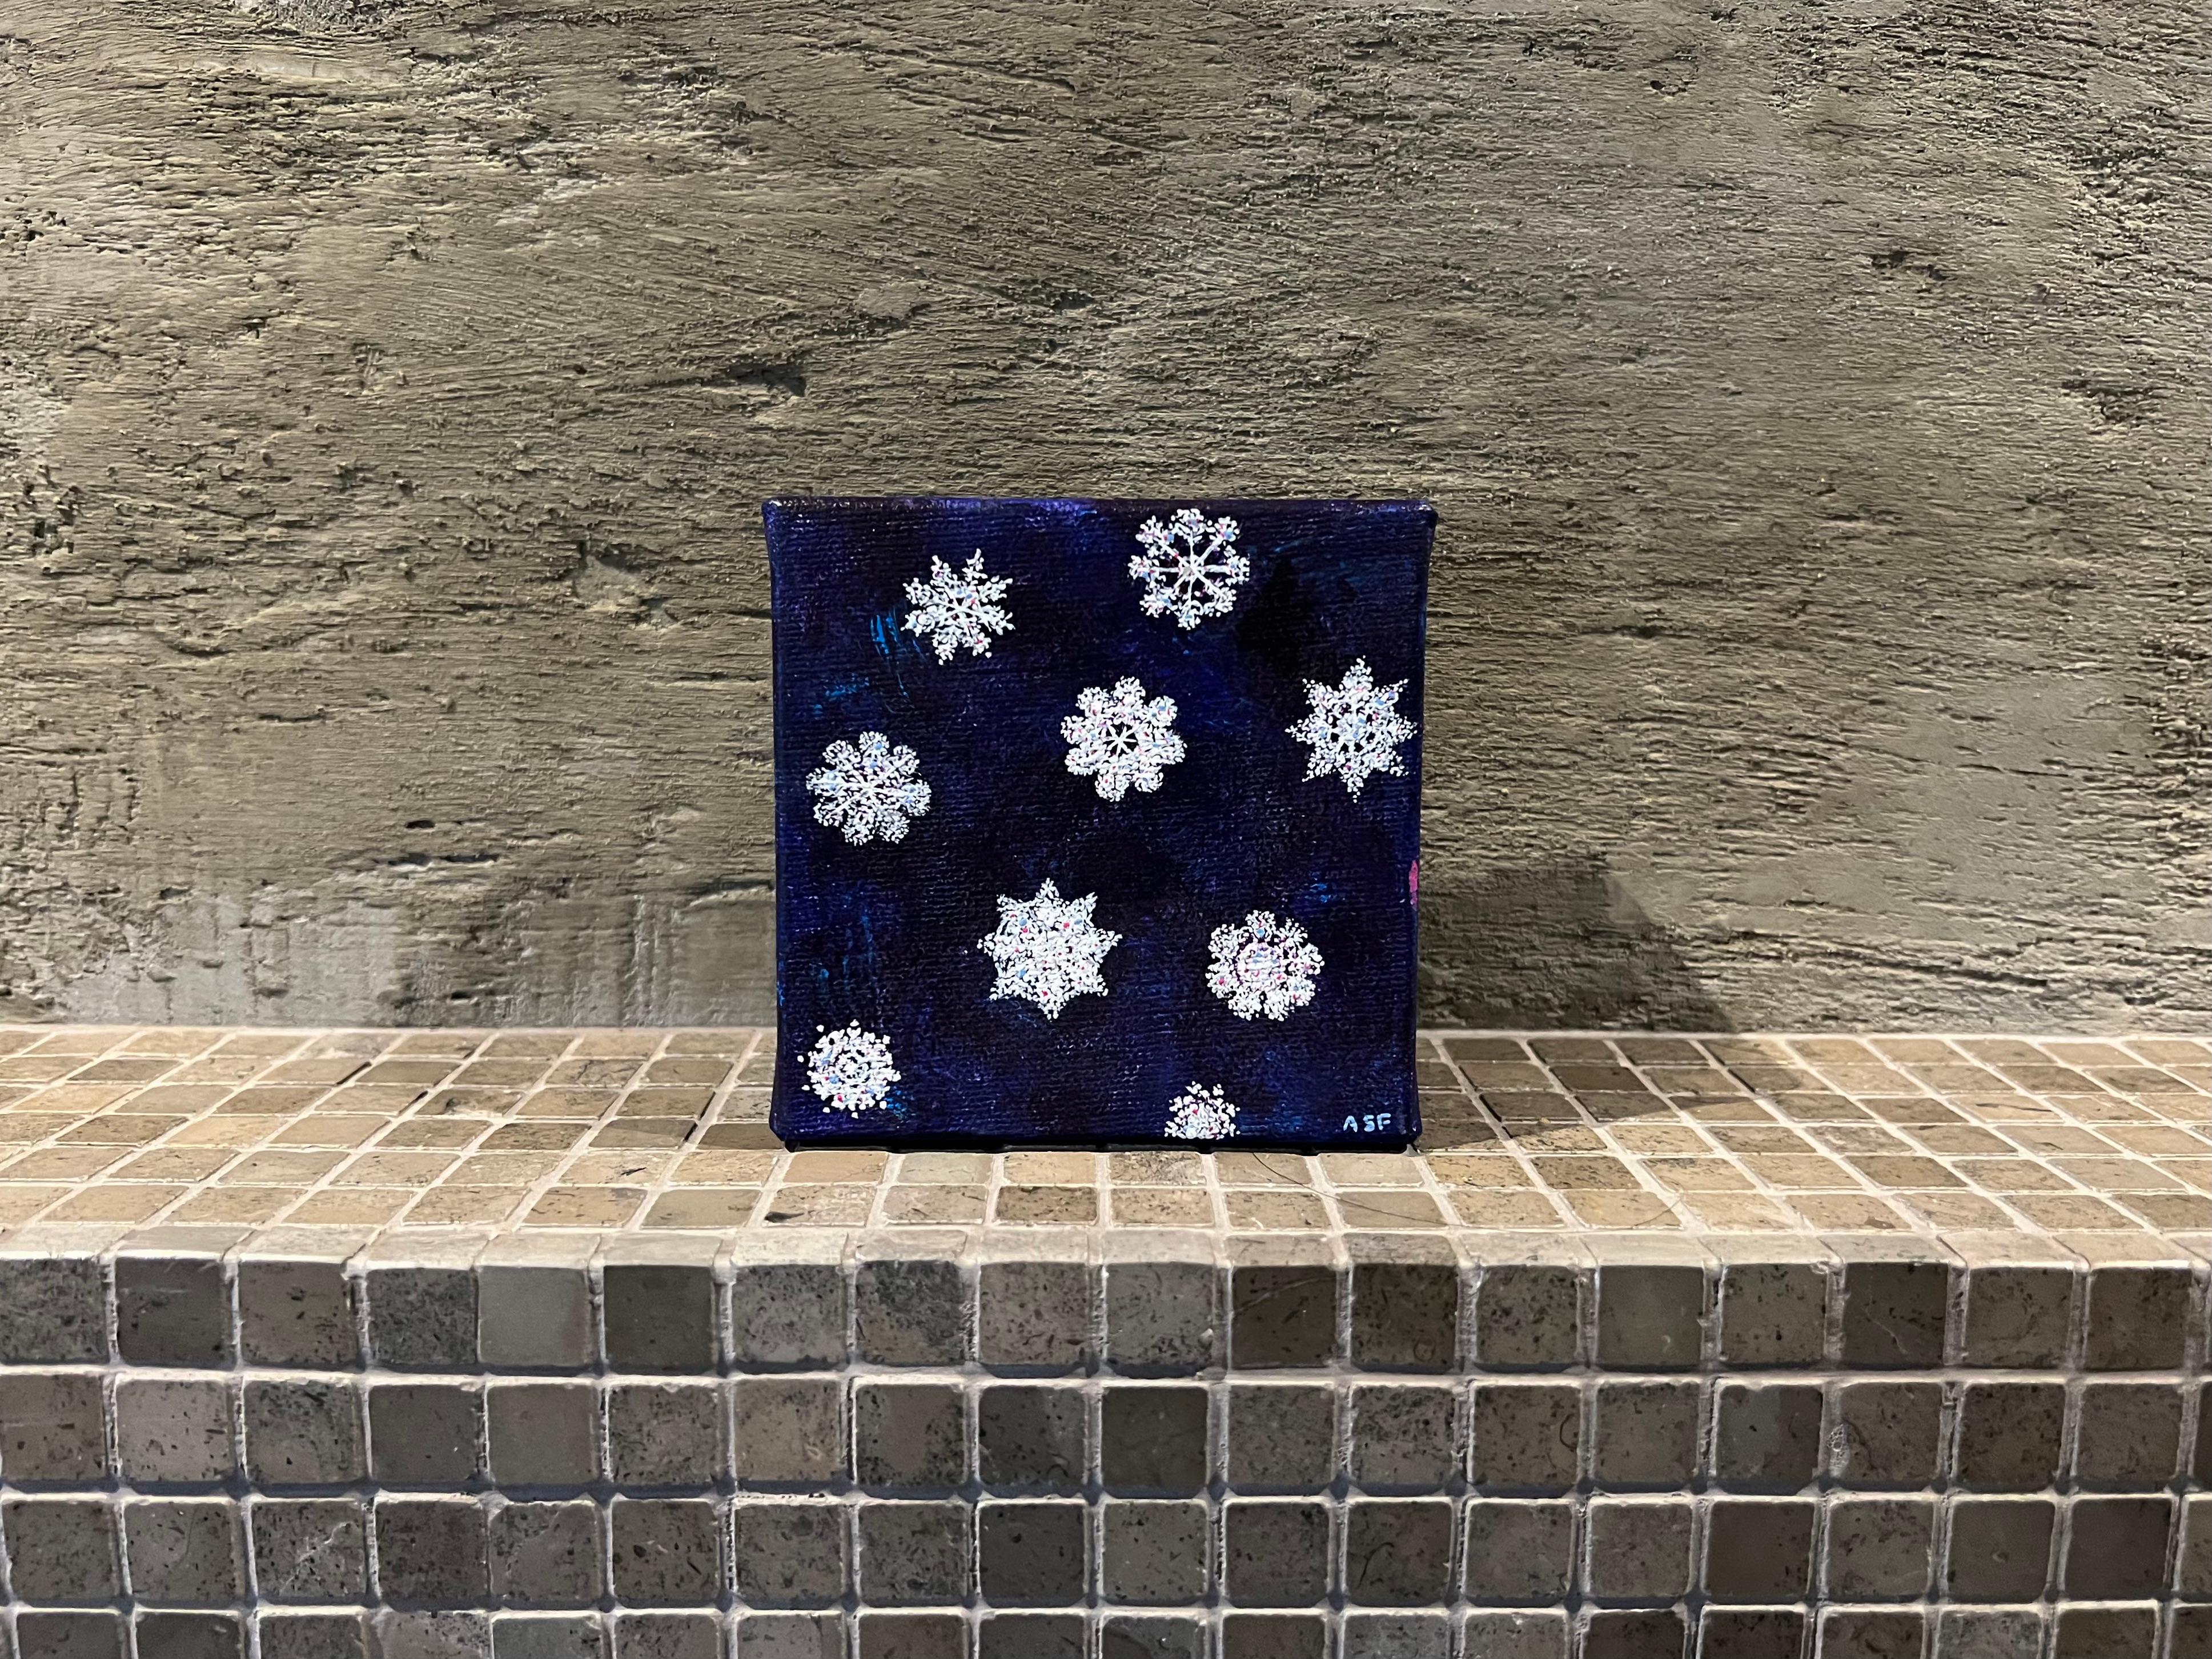 Snowflakes - lll (4"x4", Blue, White, Winter, Snow, Christmas, Small Painting) - Art by Andrea Stajan-Ferkul